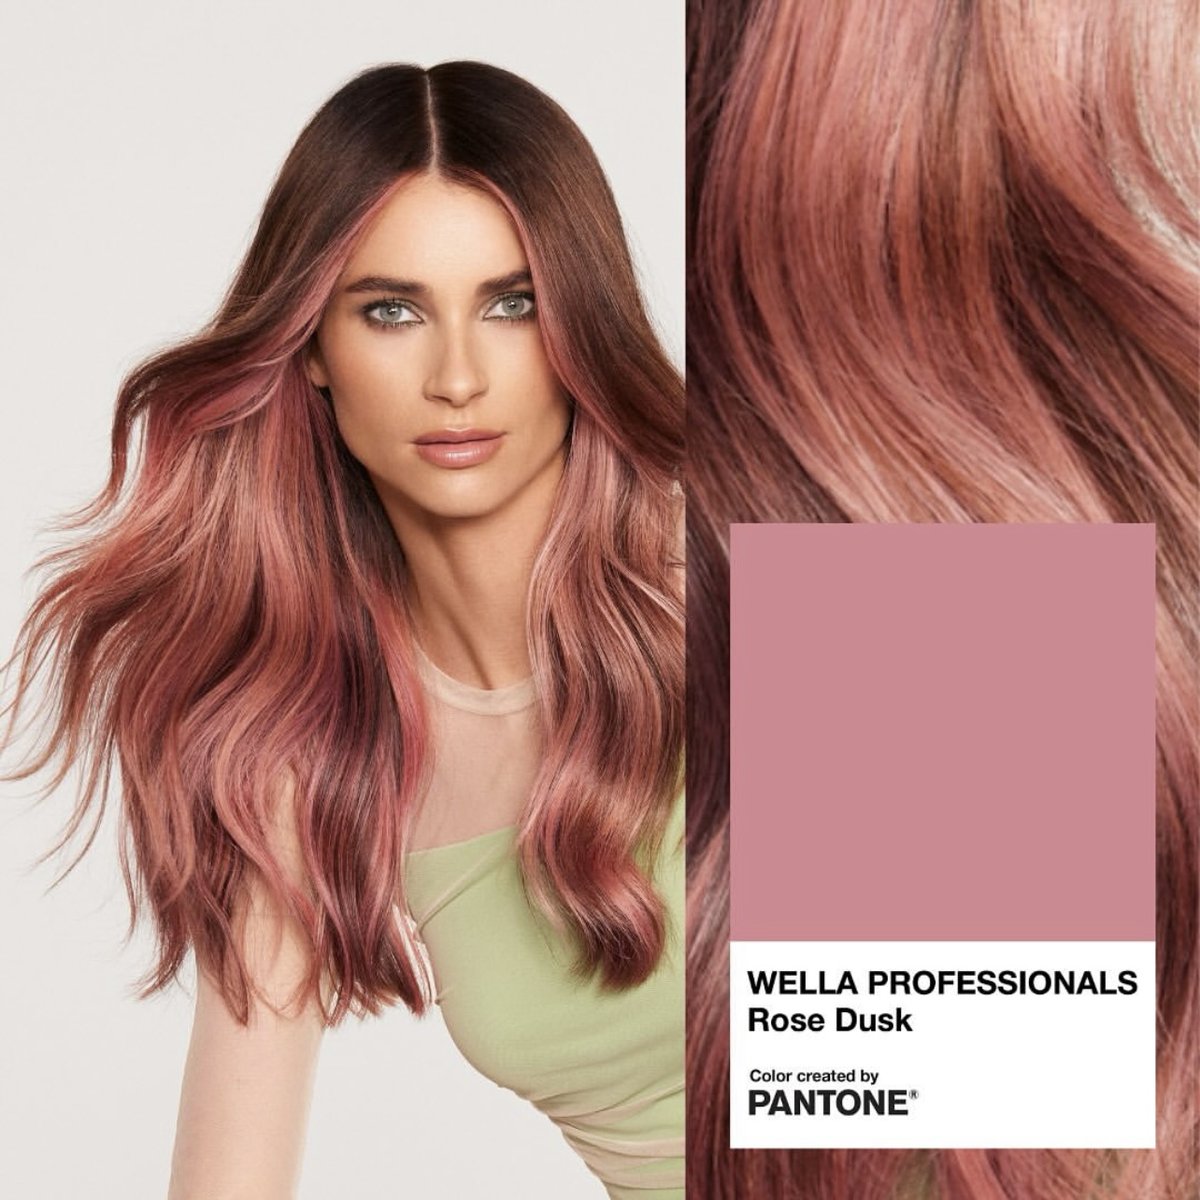 New colour inspiration from Wella Professionals and Pantone: Rose Dusk, a soft pastel tone that looks dramatic in long hair techniques like balayage, and stunning as an alternative to the pink trend on shorter hair. #NewColour #NewTrend